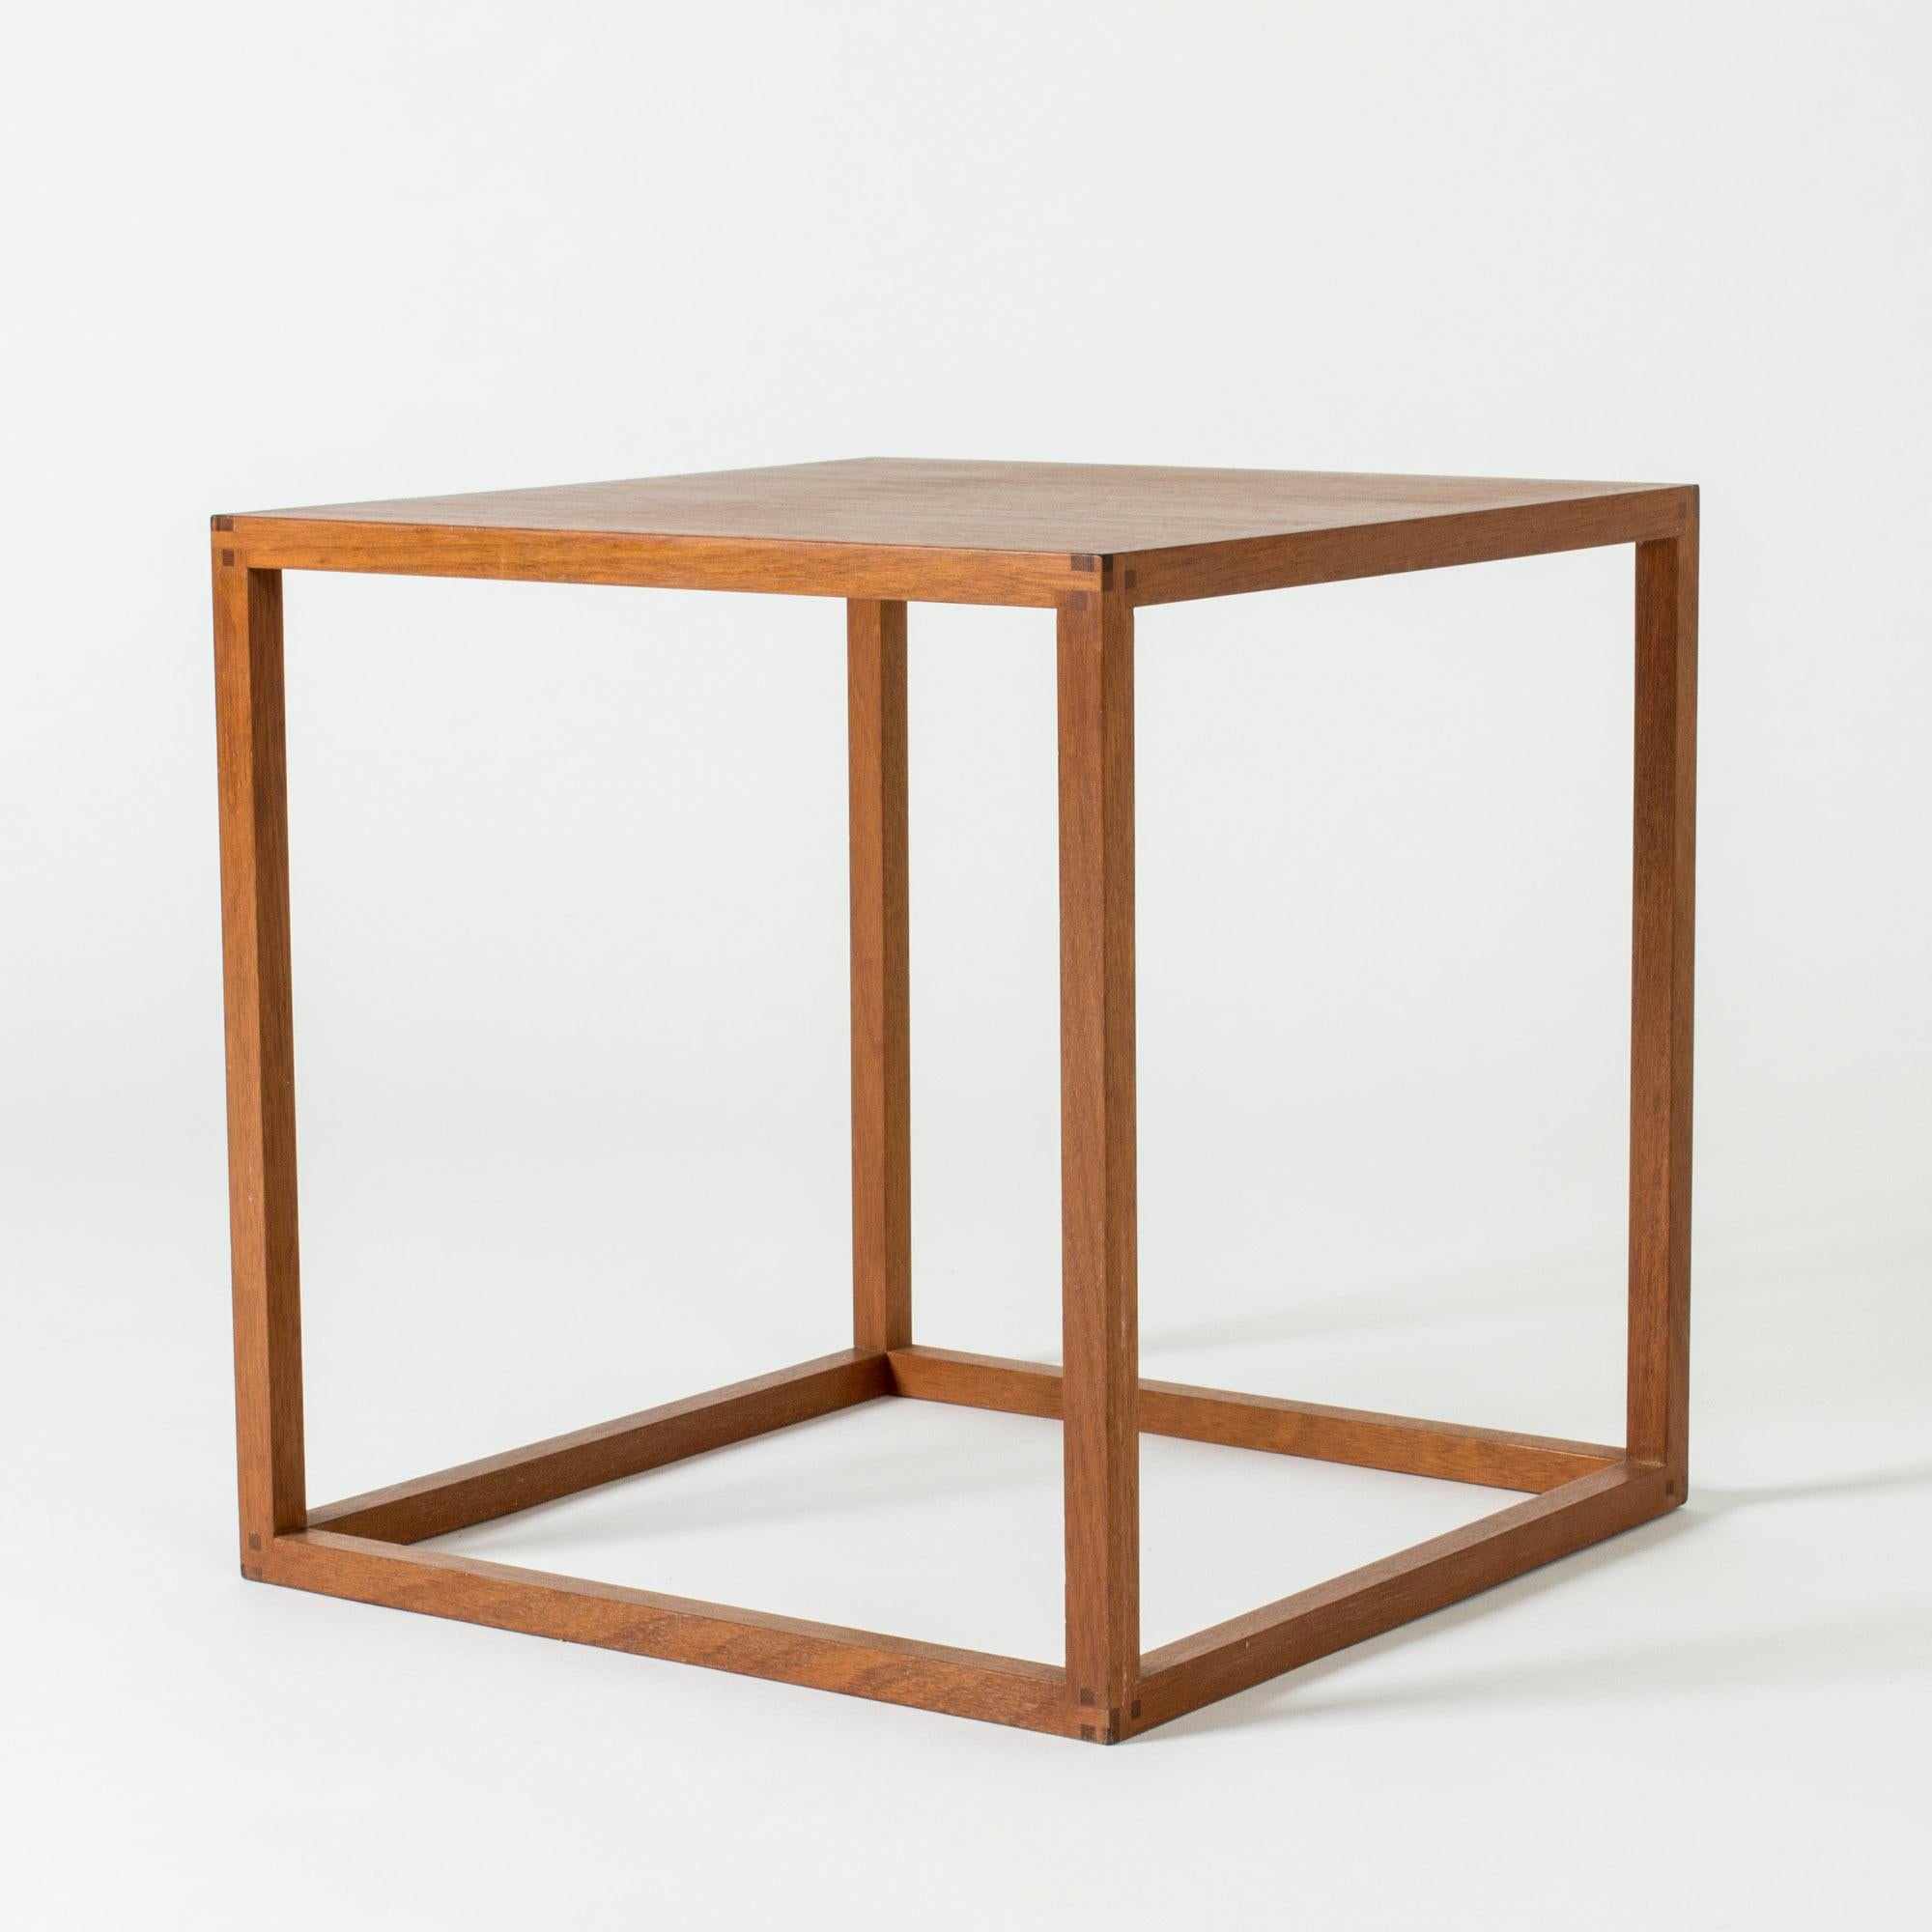 Cool teak side table from HI-gruppen, in a cubical design with an open silhouette. Elegant decorative details in the corners.